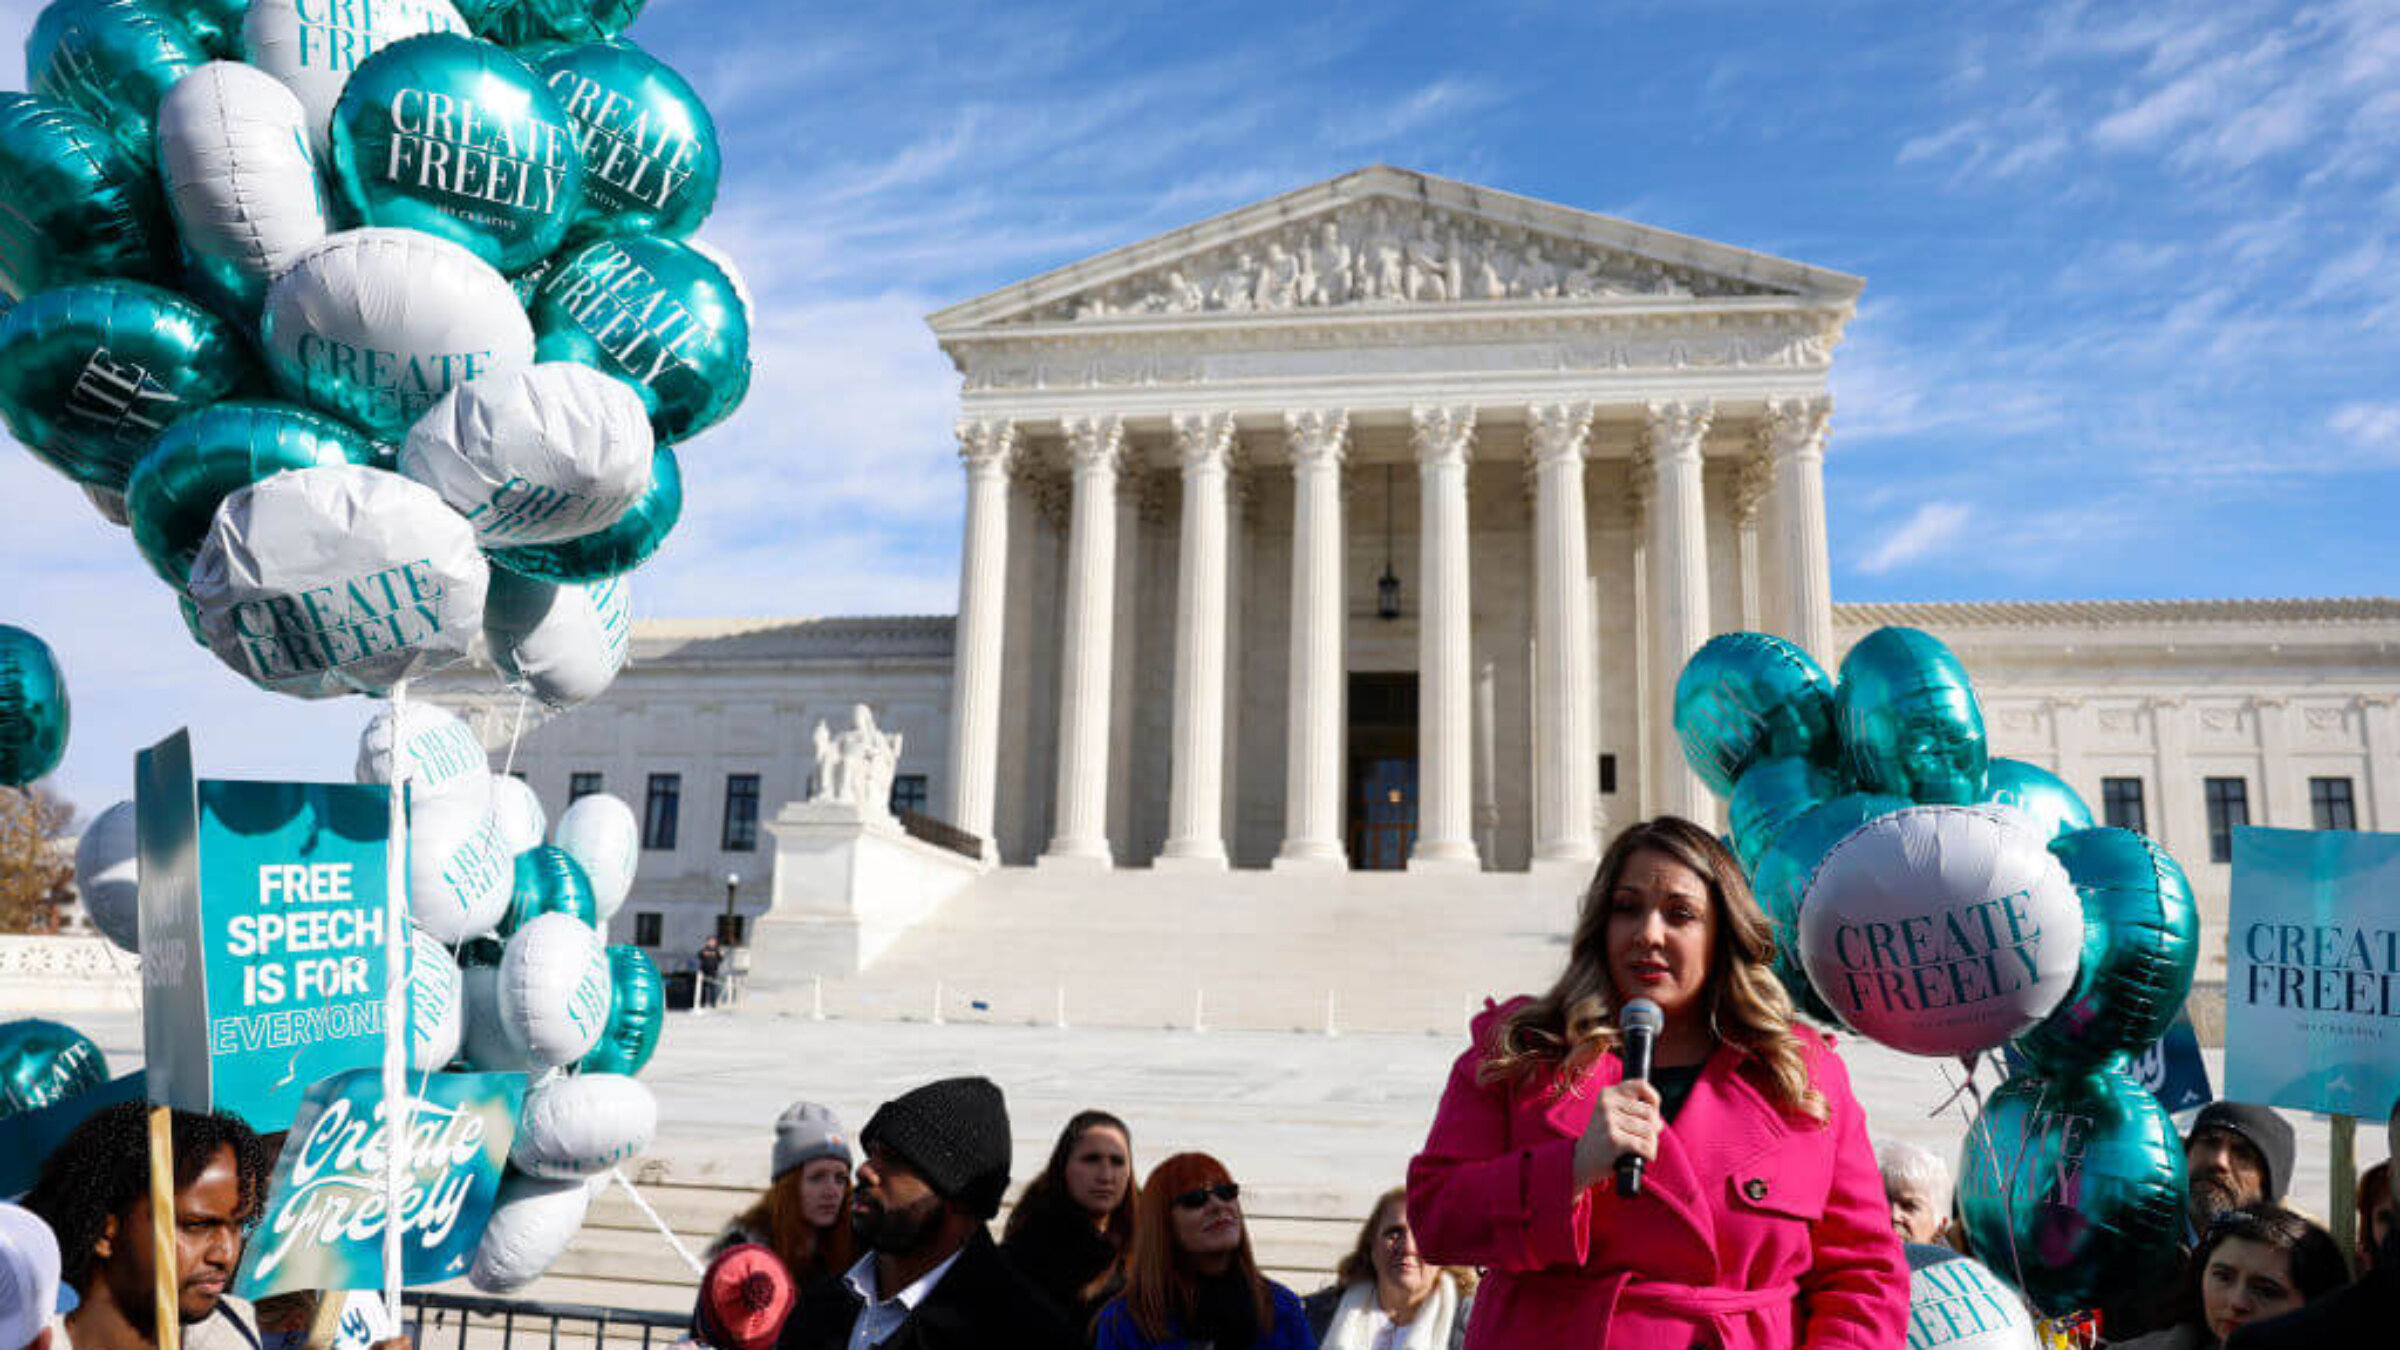 Lorie Smith, the owner of 303 Creative, a website design company in Colorado, speaks with supporters outside of the U.S. Supreme Court Building on December 05, 2022 in Washington, DC. 